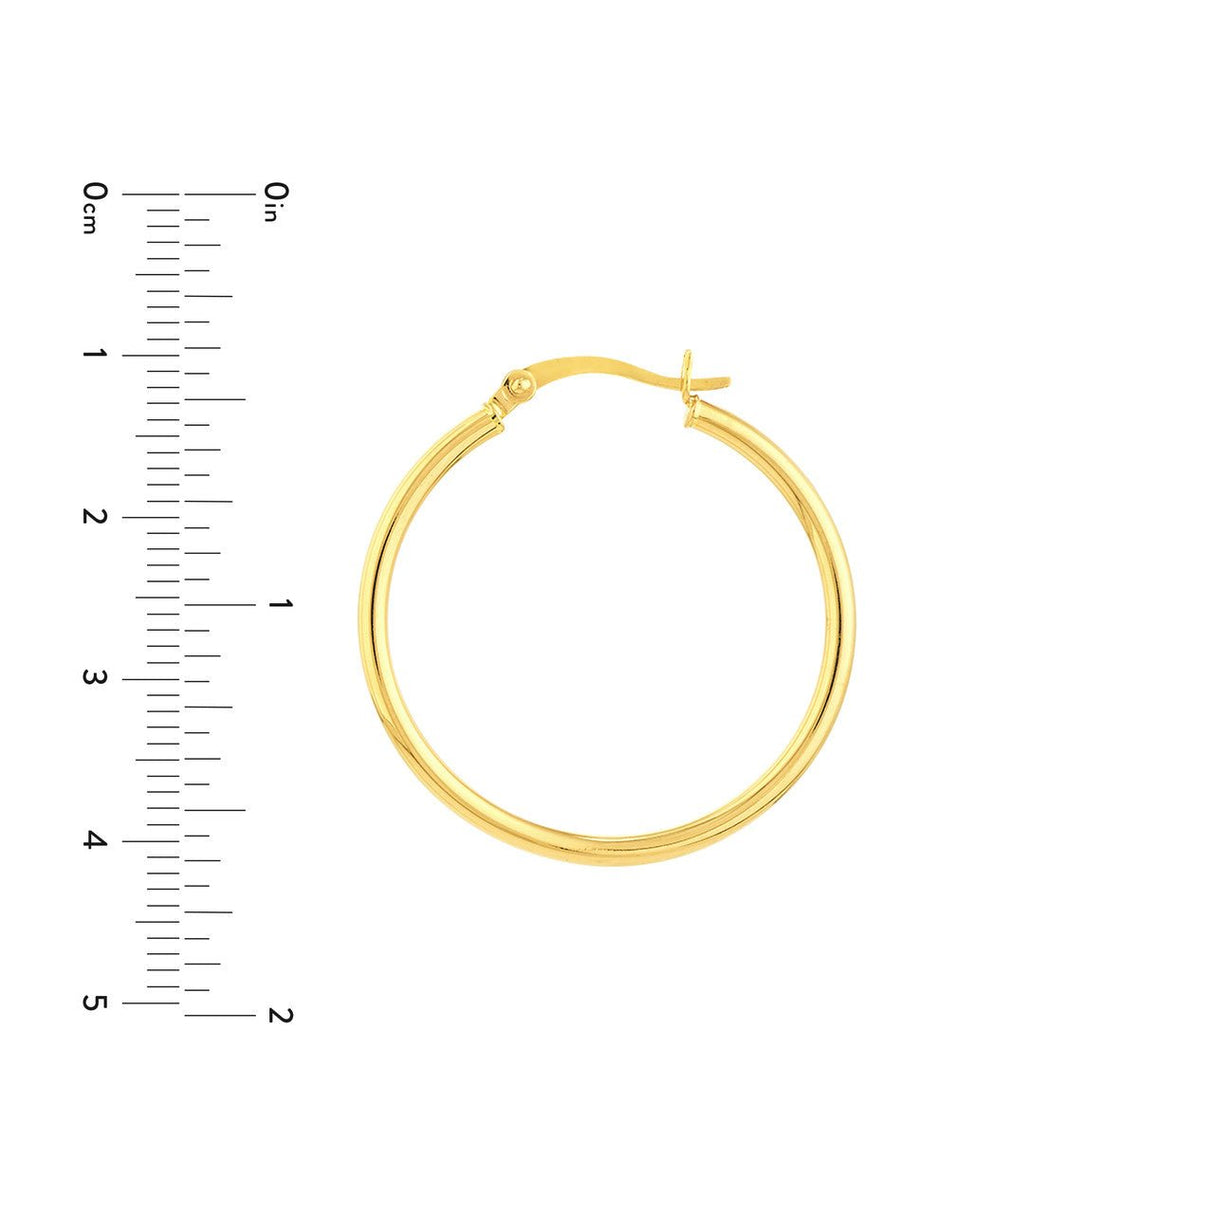 2mm x 30mm Polished Hoop Earrings,  Gold earring for all occasions gift,  Gold earring from Diamond Origin,  Dazzling from every angle, these 14K gold hoop earrings from the 2023 Collection will feel effortlessly stylish on your ears. The 2mm x 30mm polished hoops add a touch of passion and luxury to any outfit. Glam up your look with these beautiful earrings. Make a statement you won't forget!   